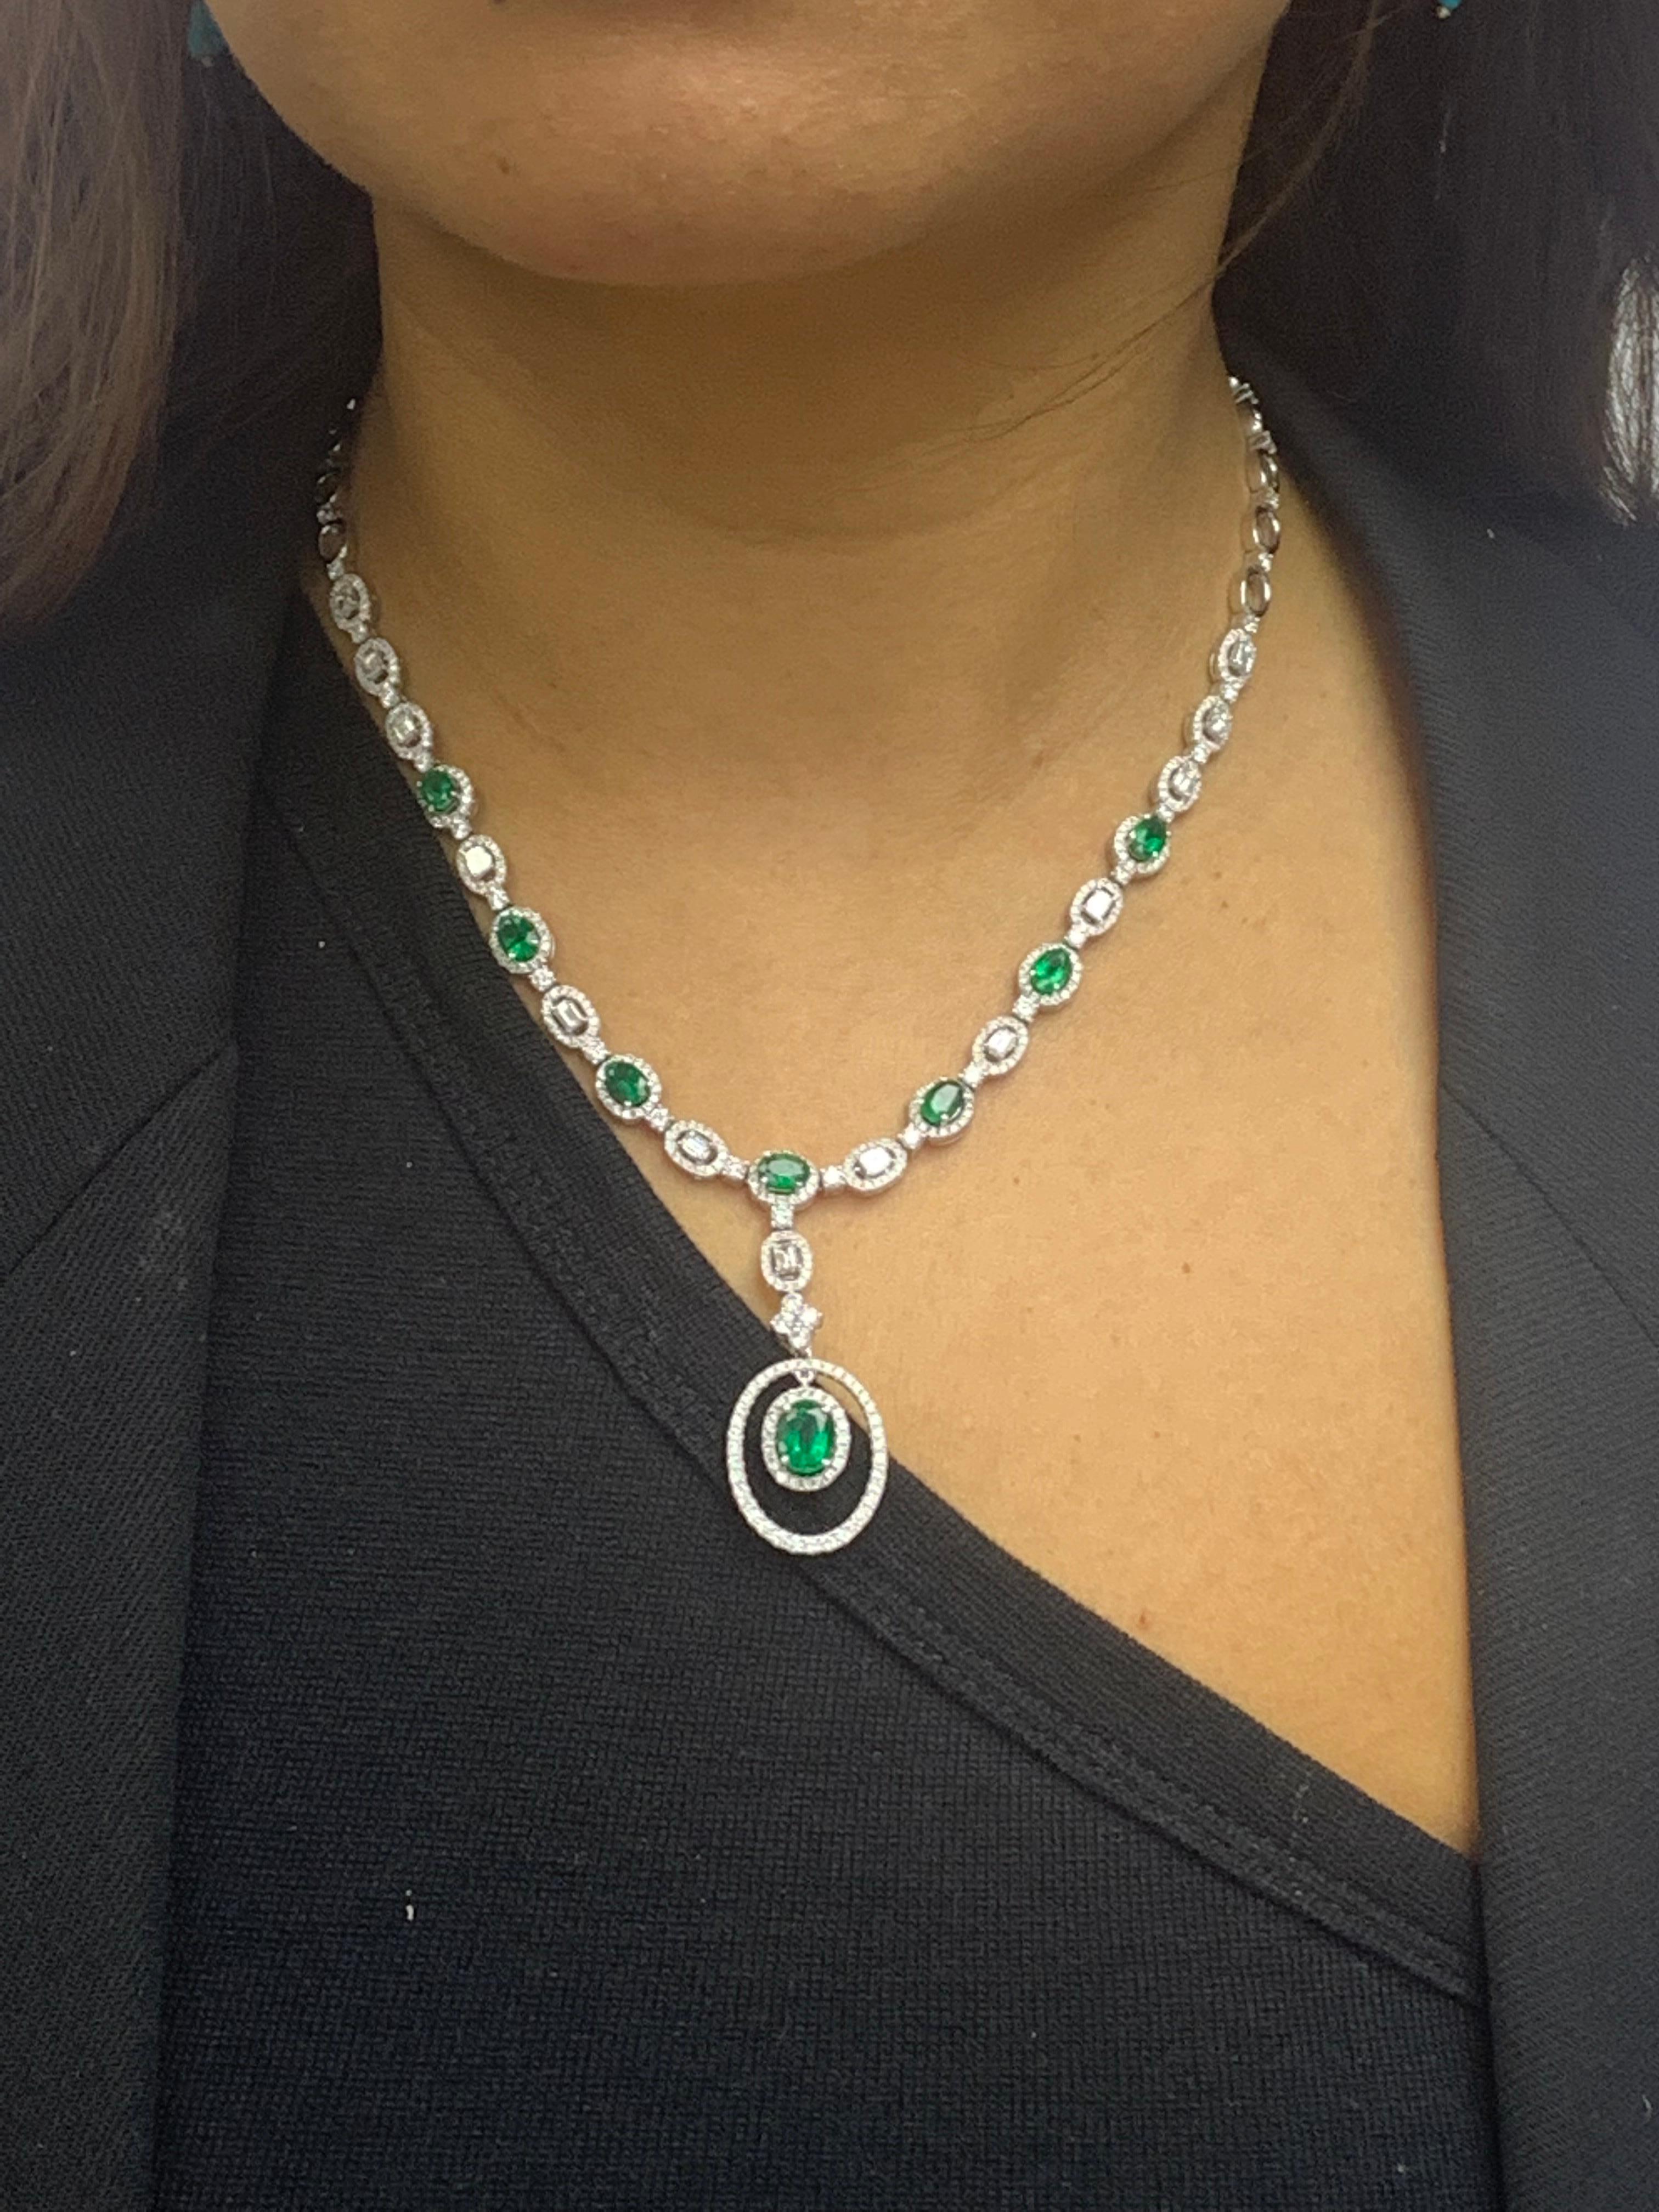 Modern 4.21 Carat Oval Cut Emerald and Diamond Necklace in 18 White Gold For Sale